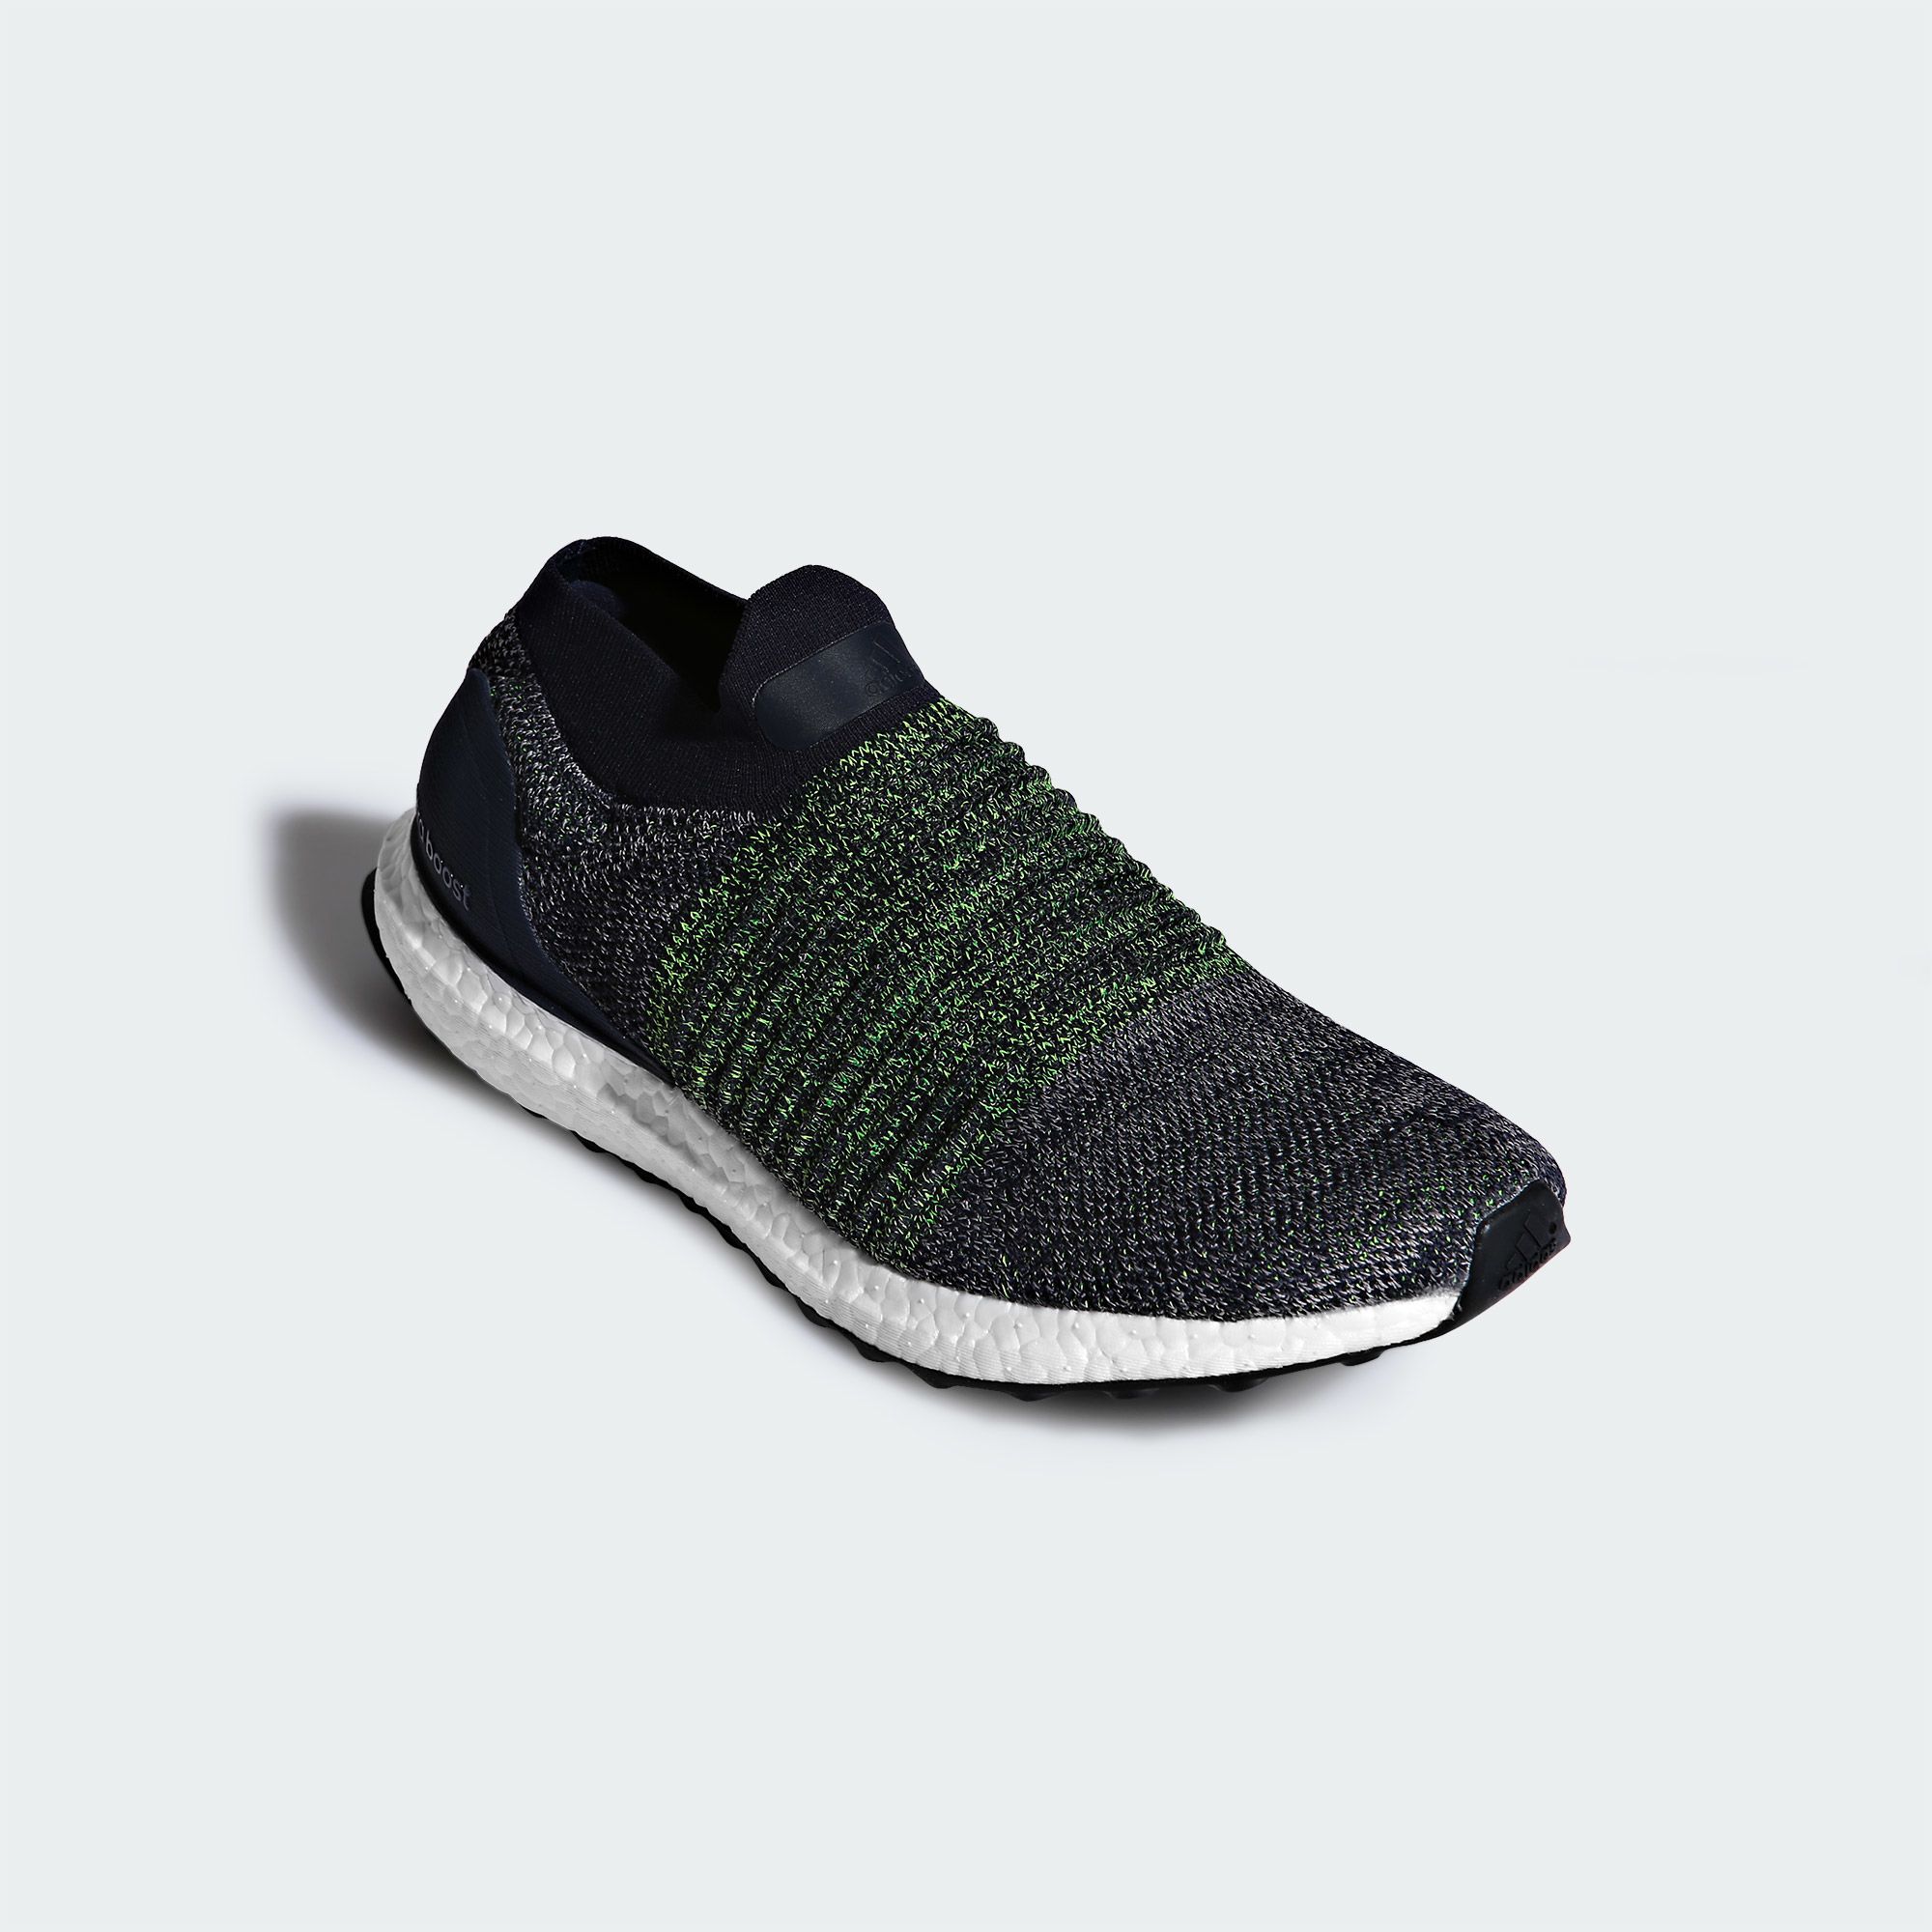 adidas-ultra-boost-laceless-legend-ink-green-3